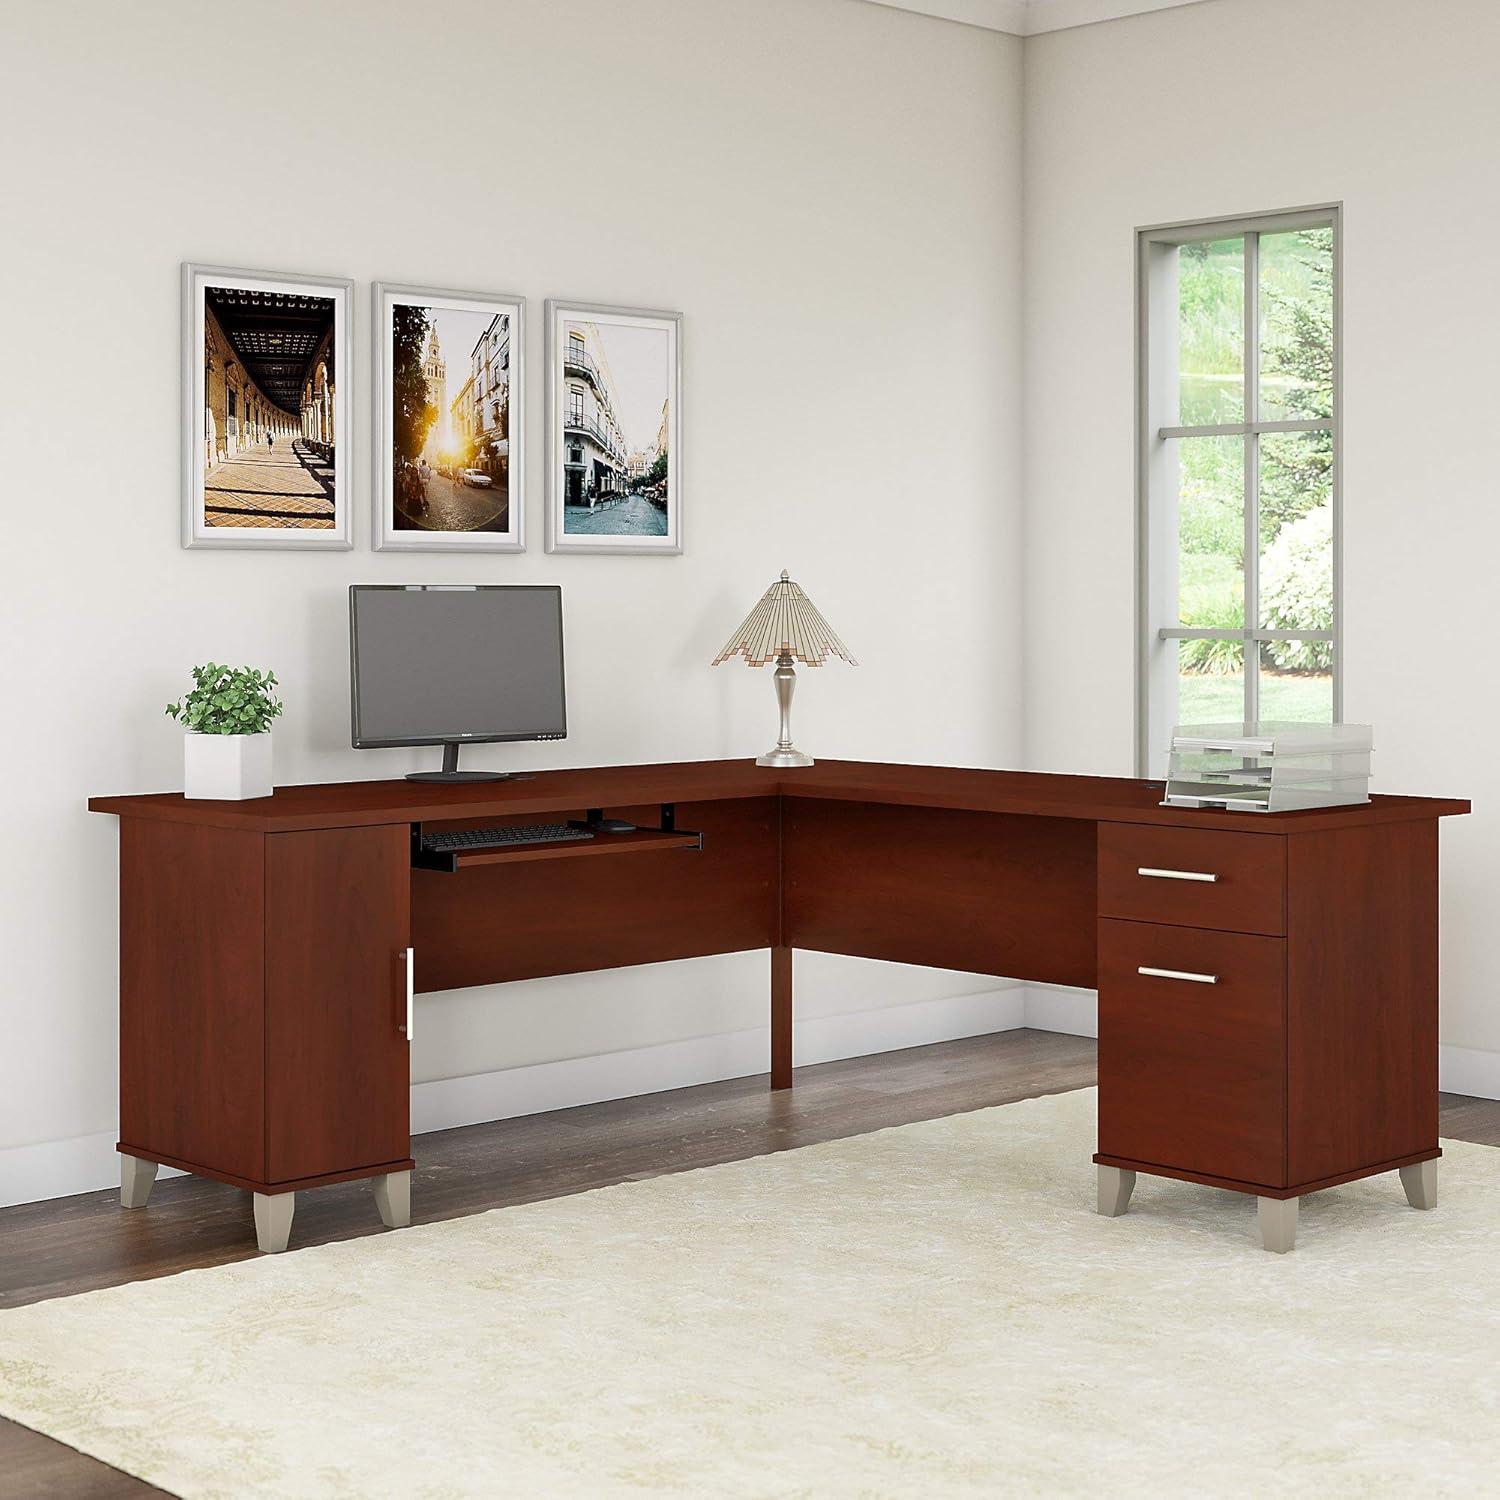 Hansen Cherry 71'' L-Shaped Wood Desk with Keyboard Tray and Filing Cabinet